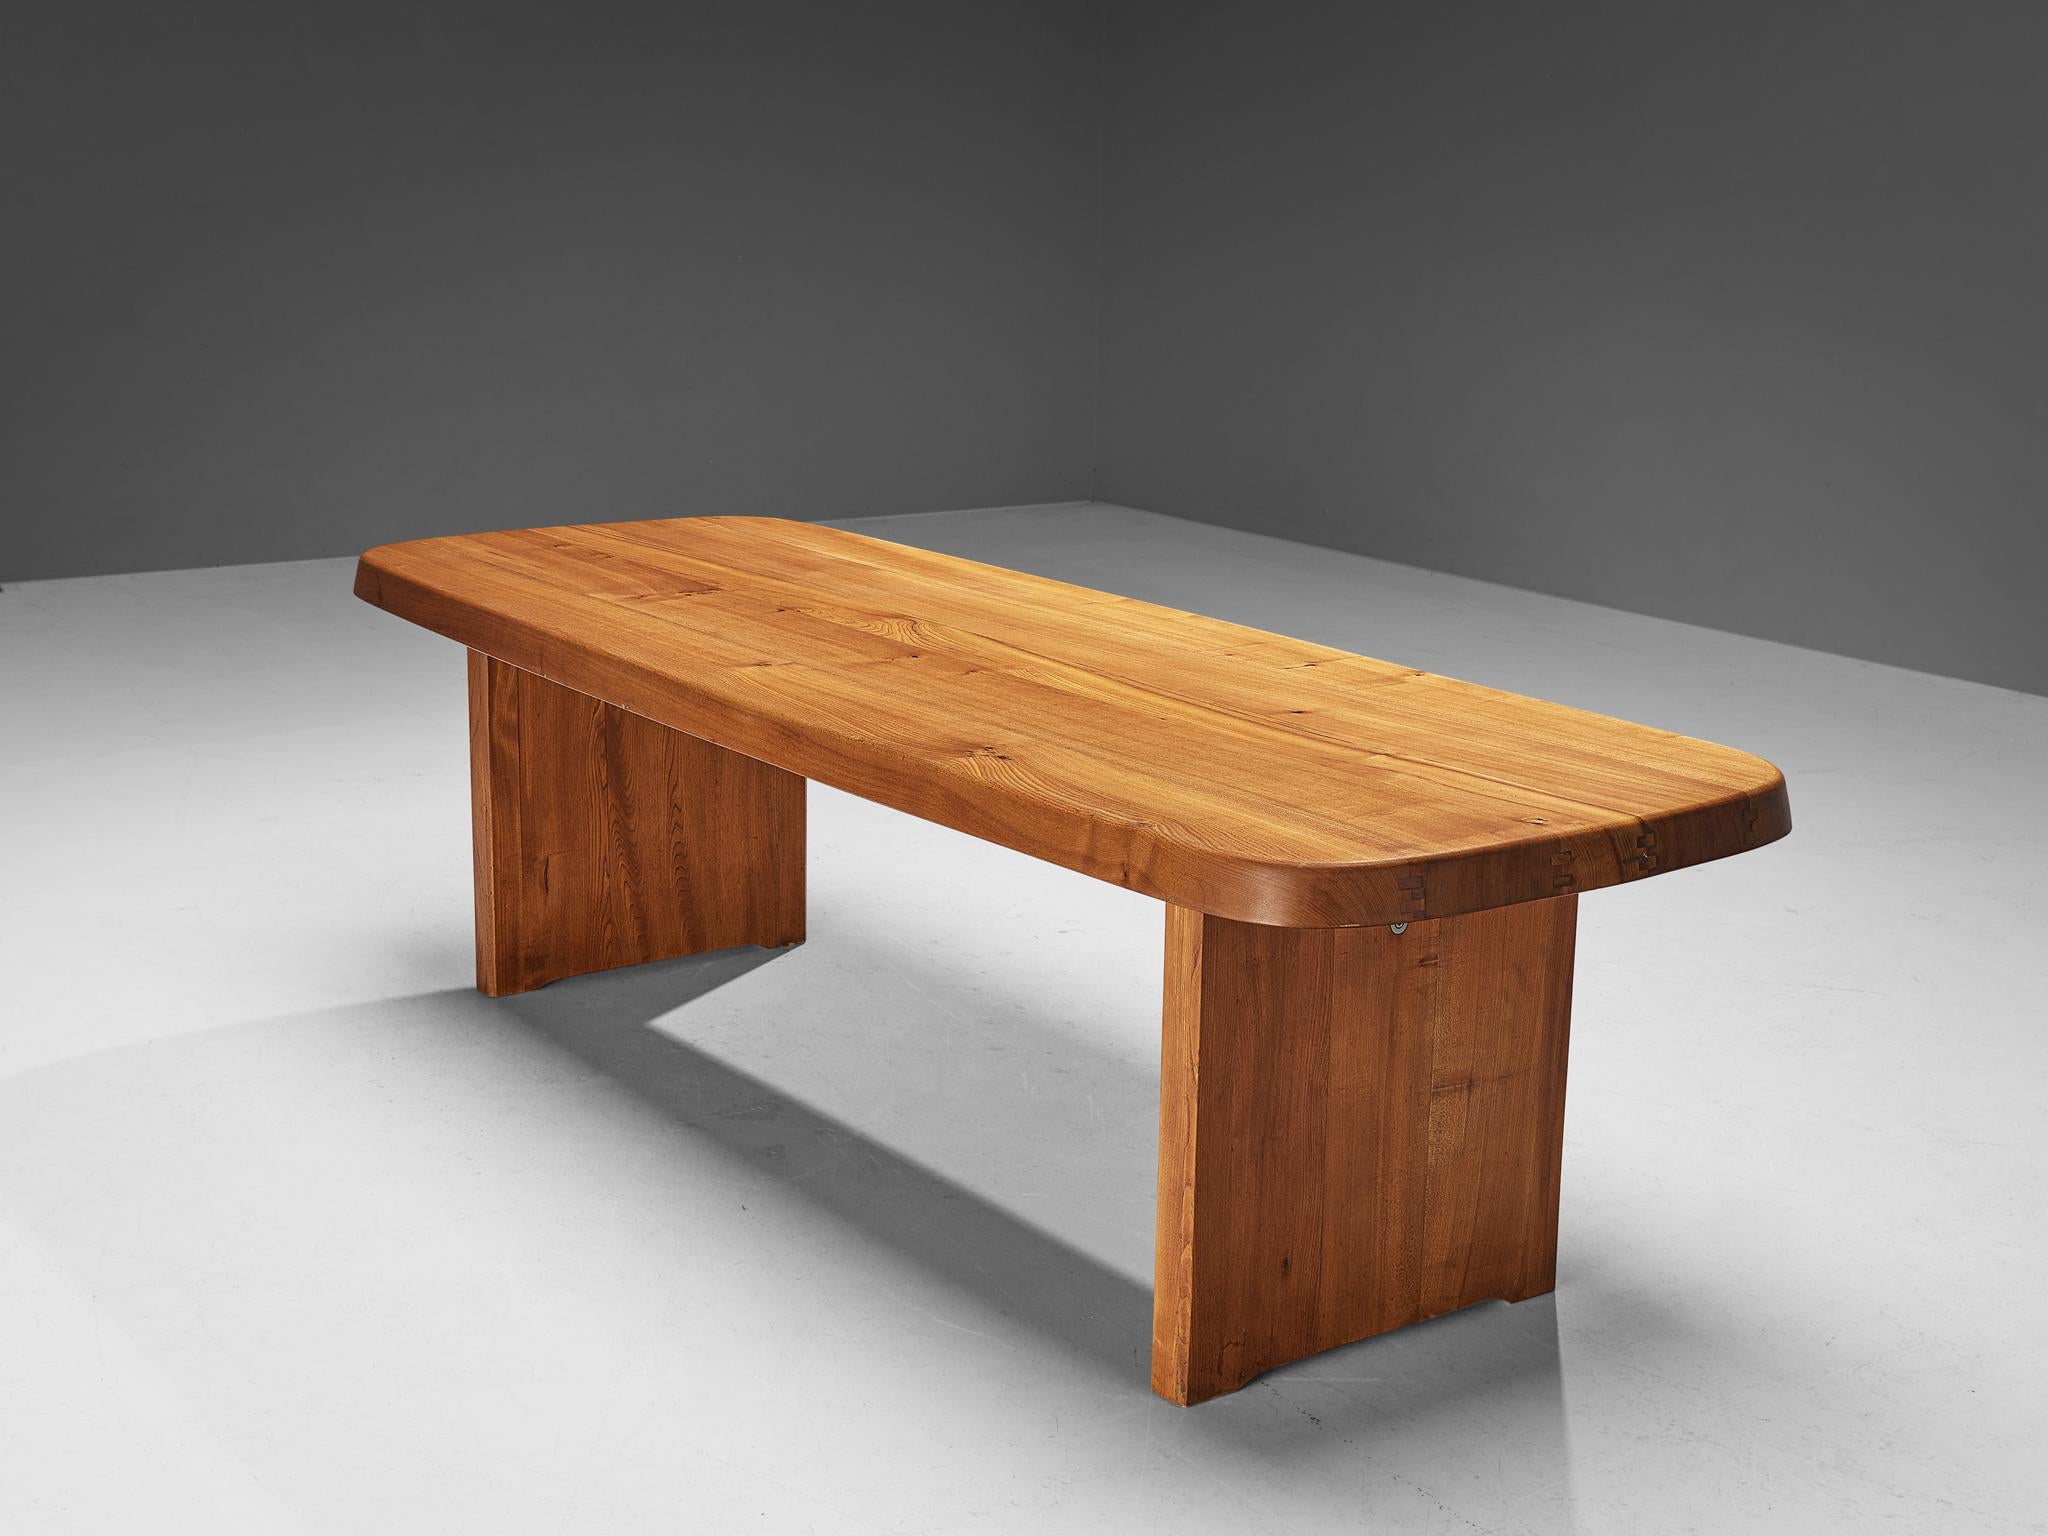 Pierre Chapo, dining table, model T20A, elmwood, France, 1970s.

This design is an early edition, created according to the original craft methodology of Pierre Chapo. The table is designed in 1972 when Pierre Chapo revisited the idea of the T14